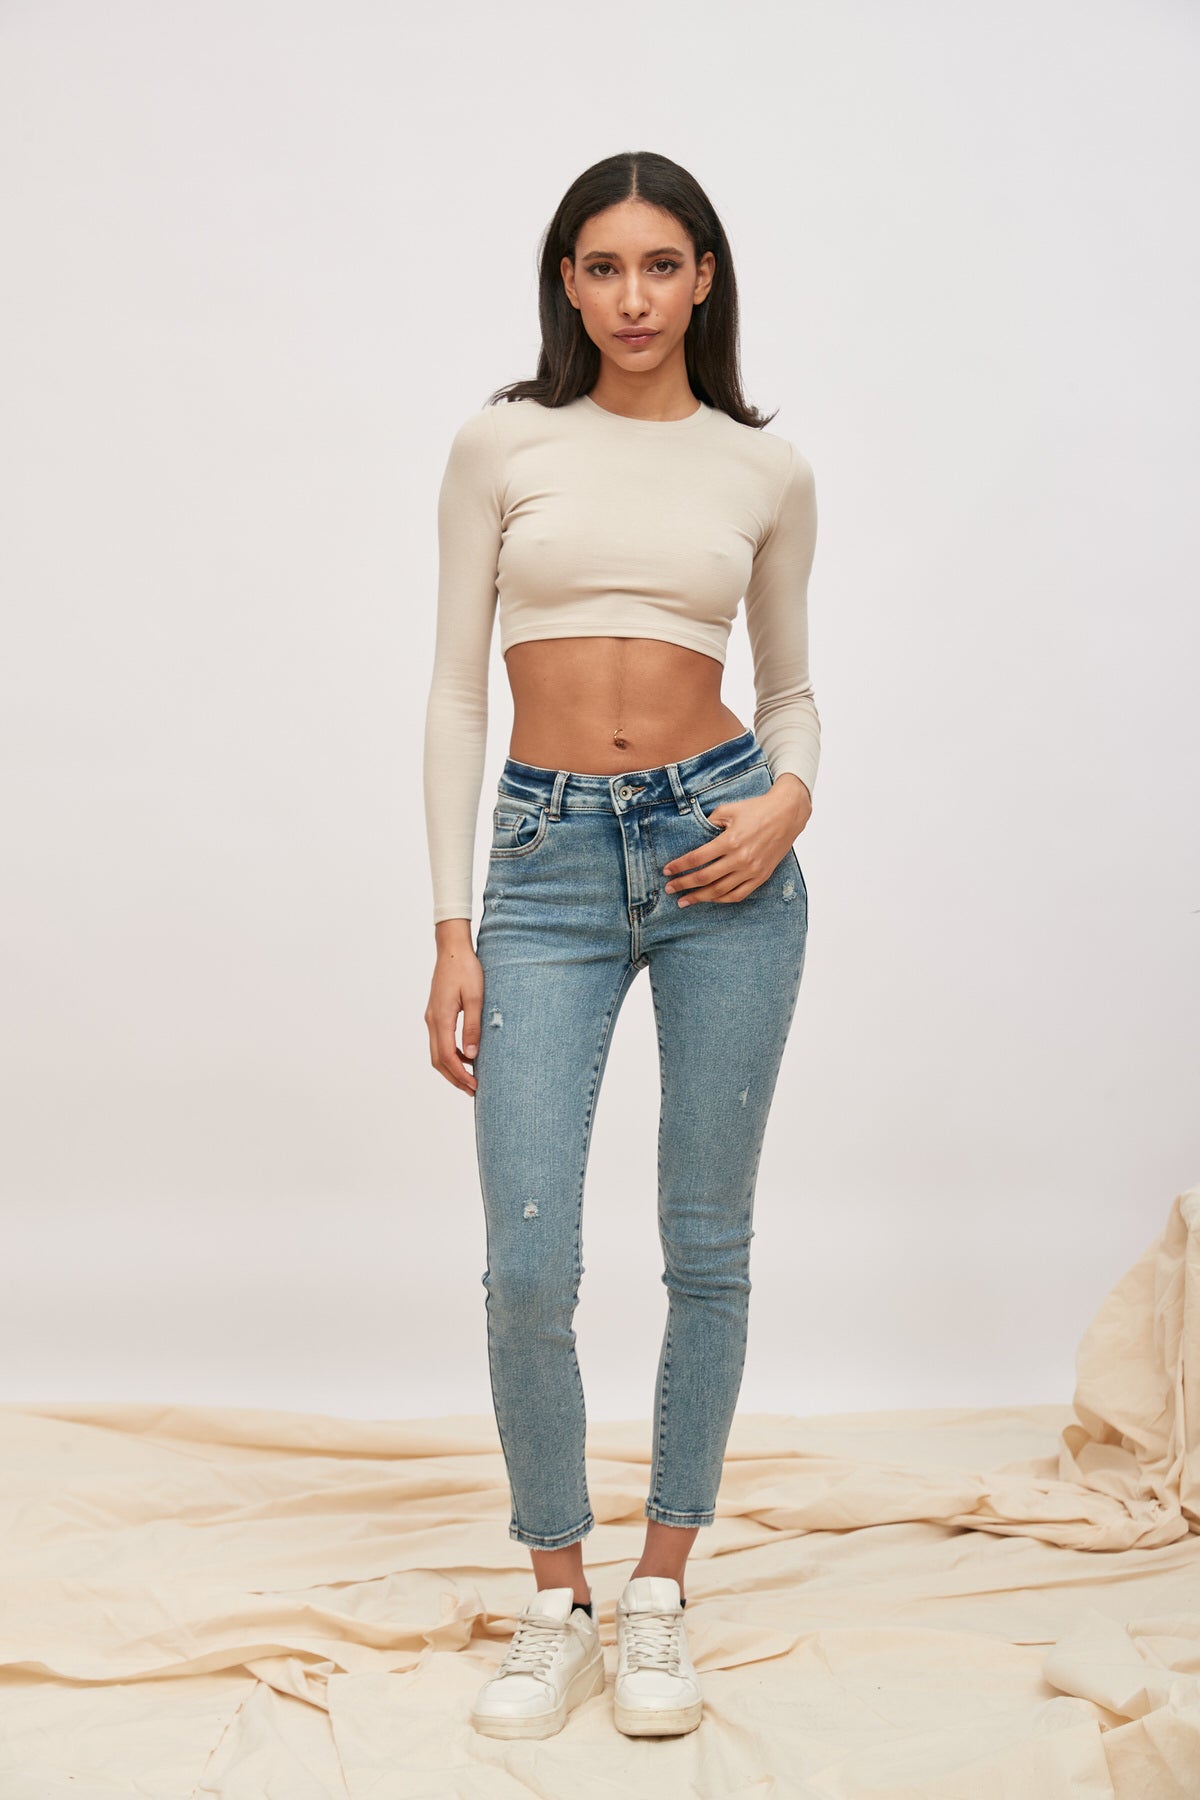 Slim jeans high waist tired worm effect - happiness